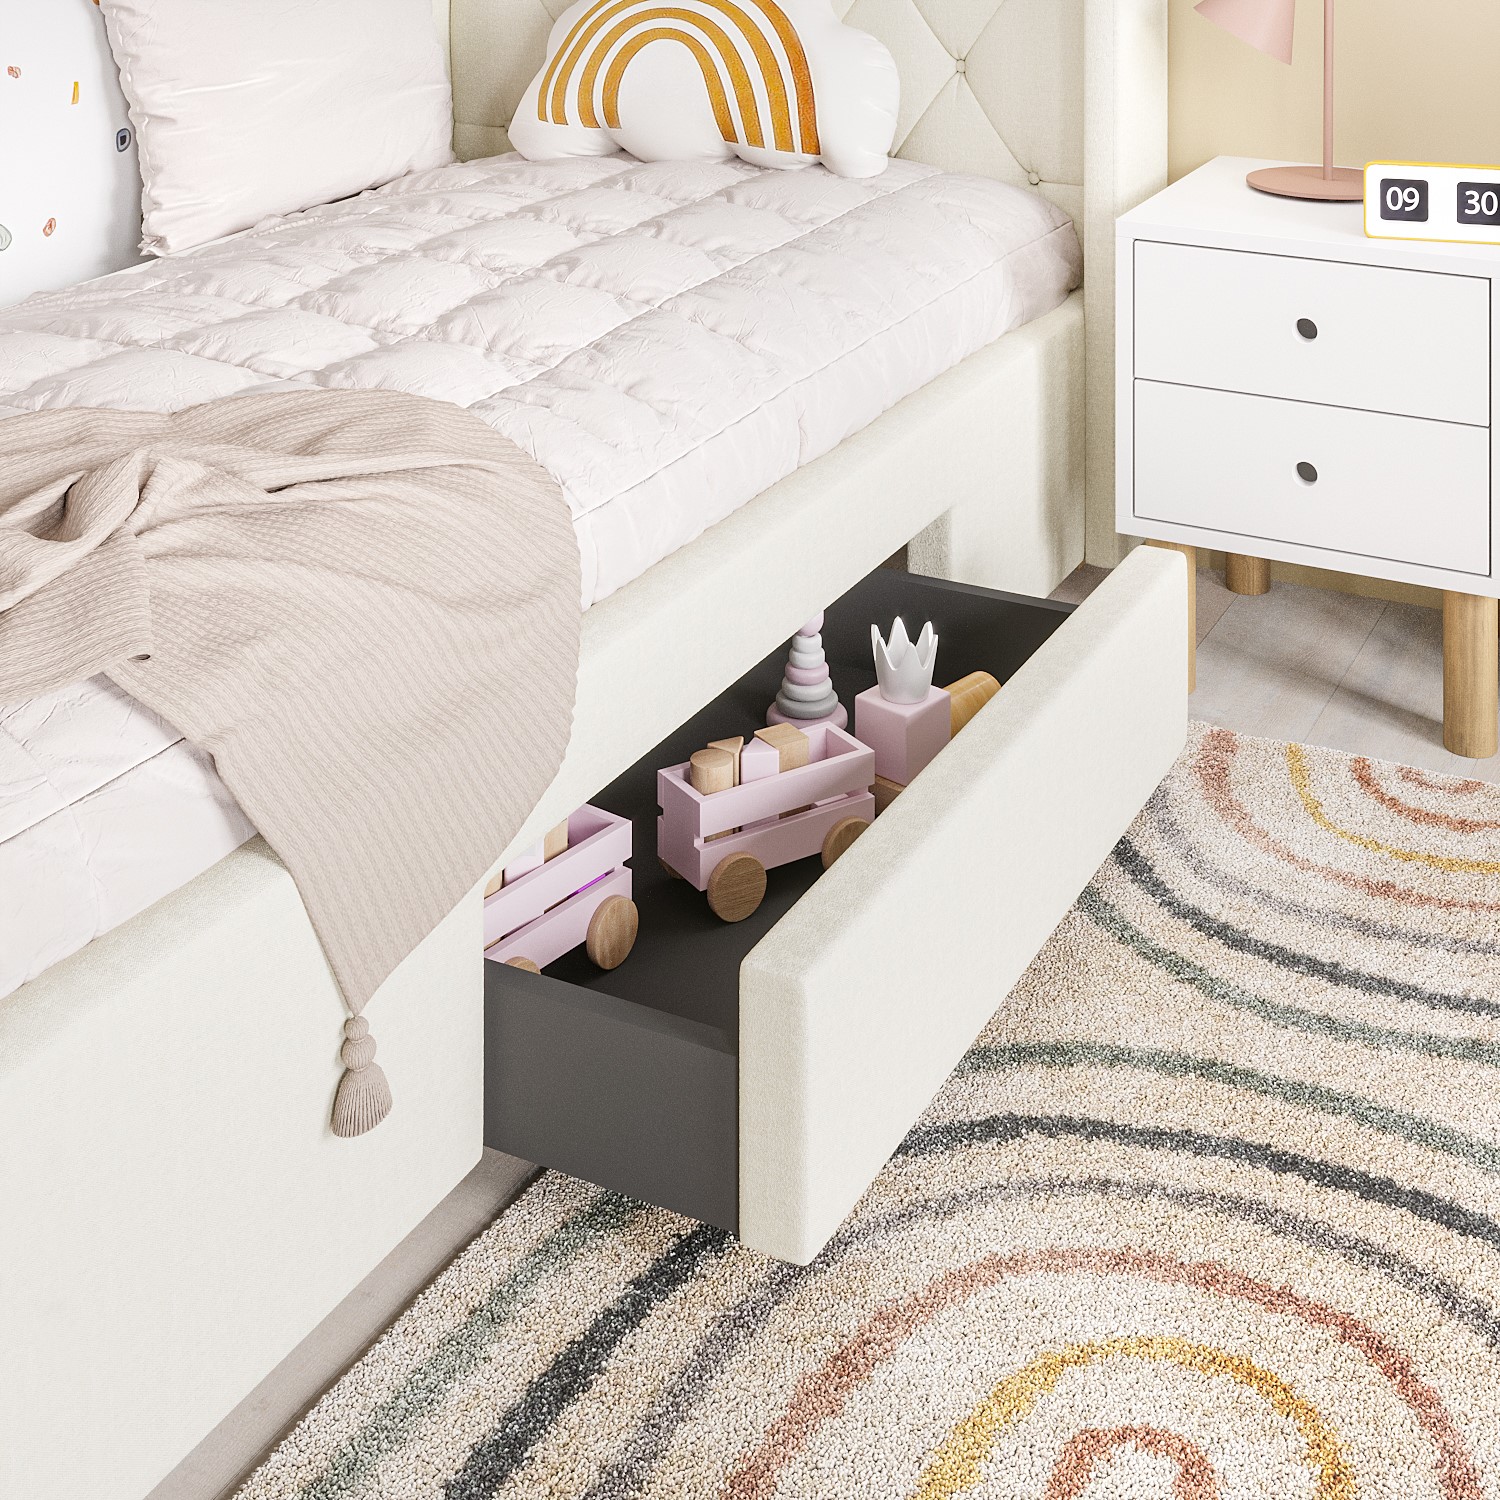 Read more about Beige fabric single bed frame with storage drawer phoebe